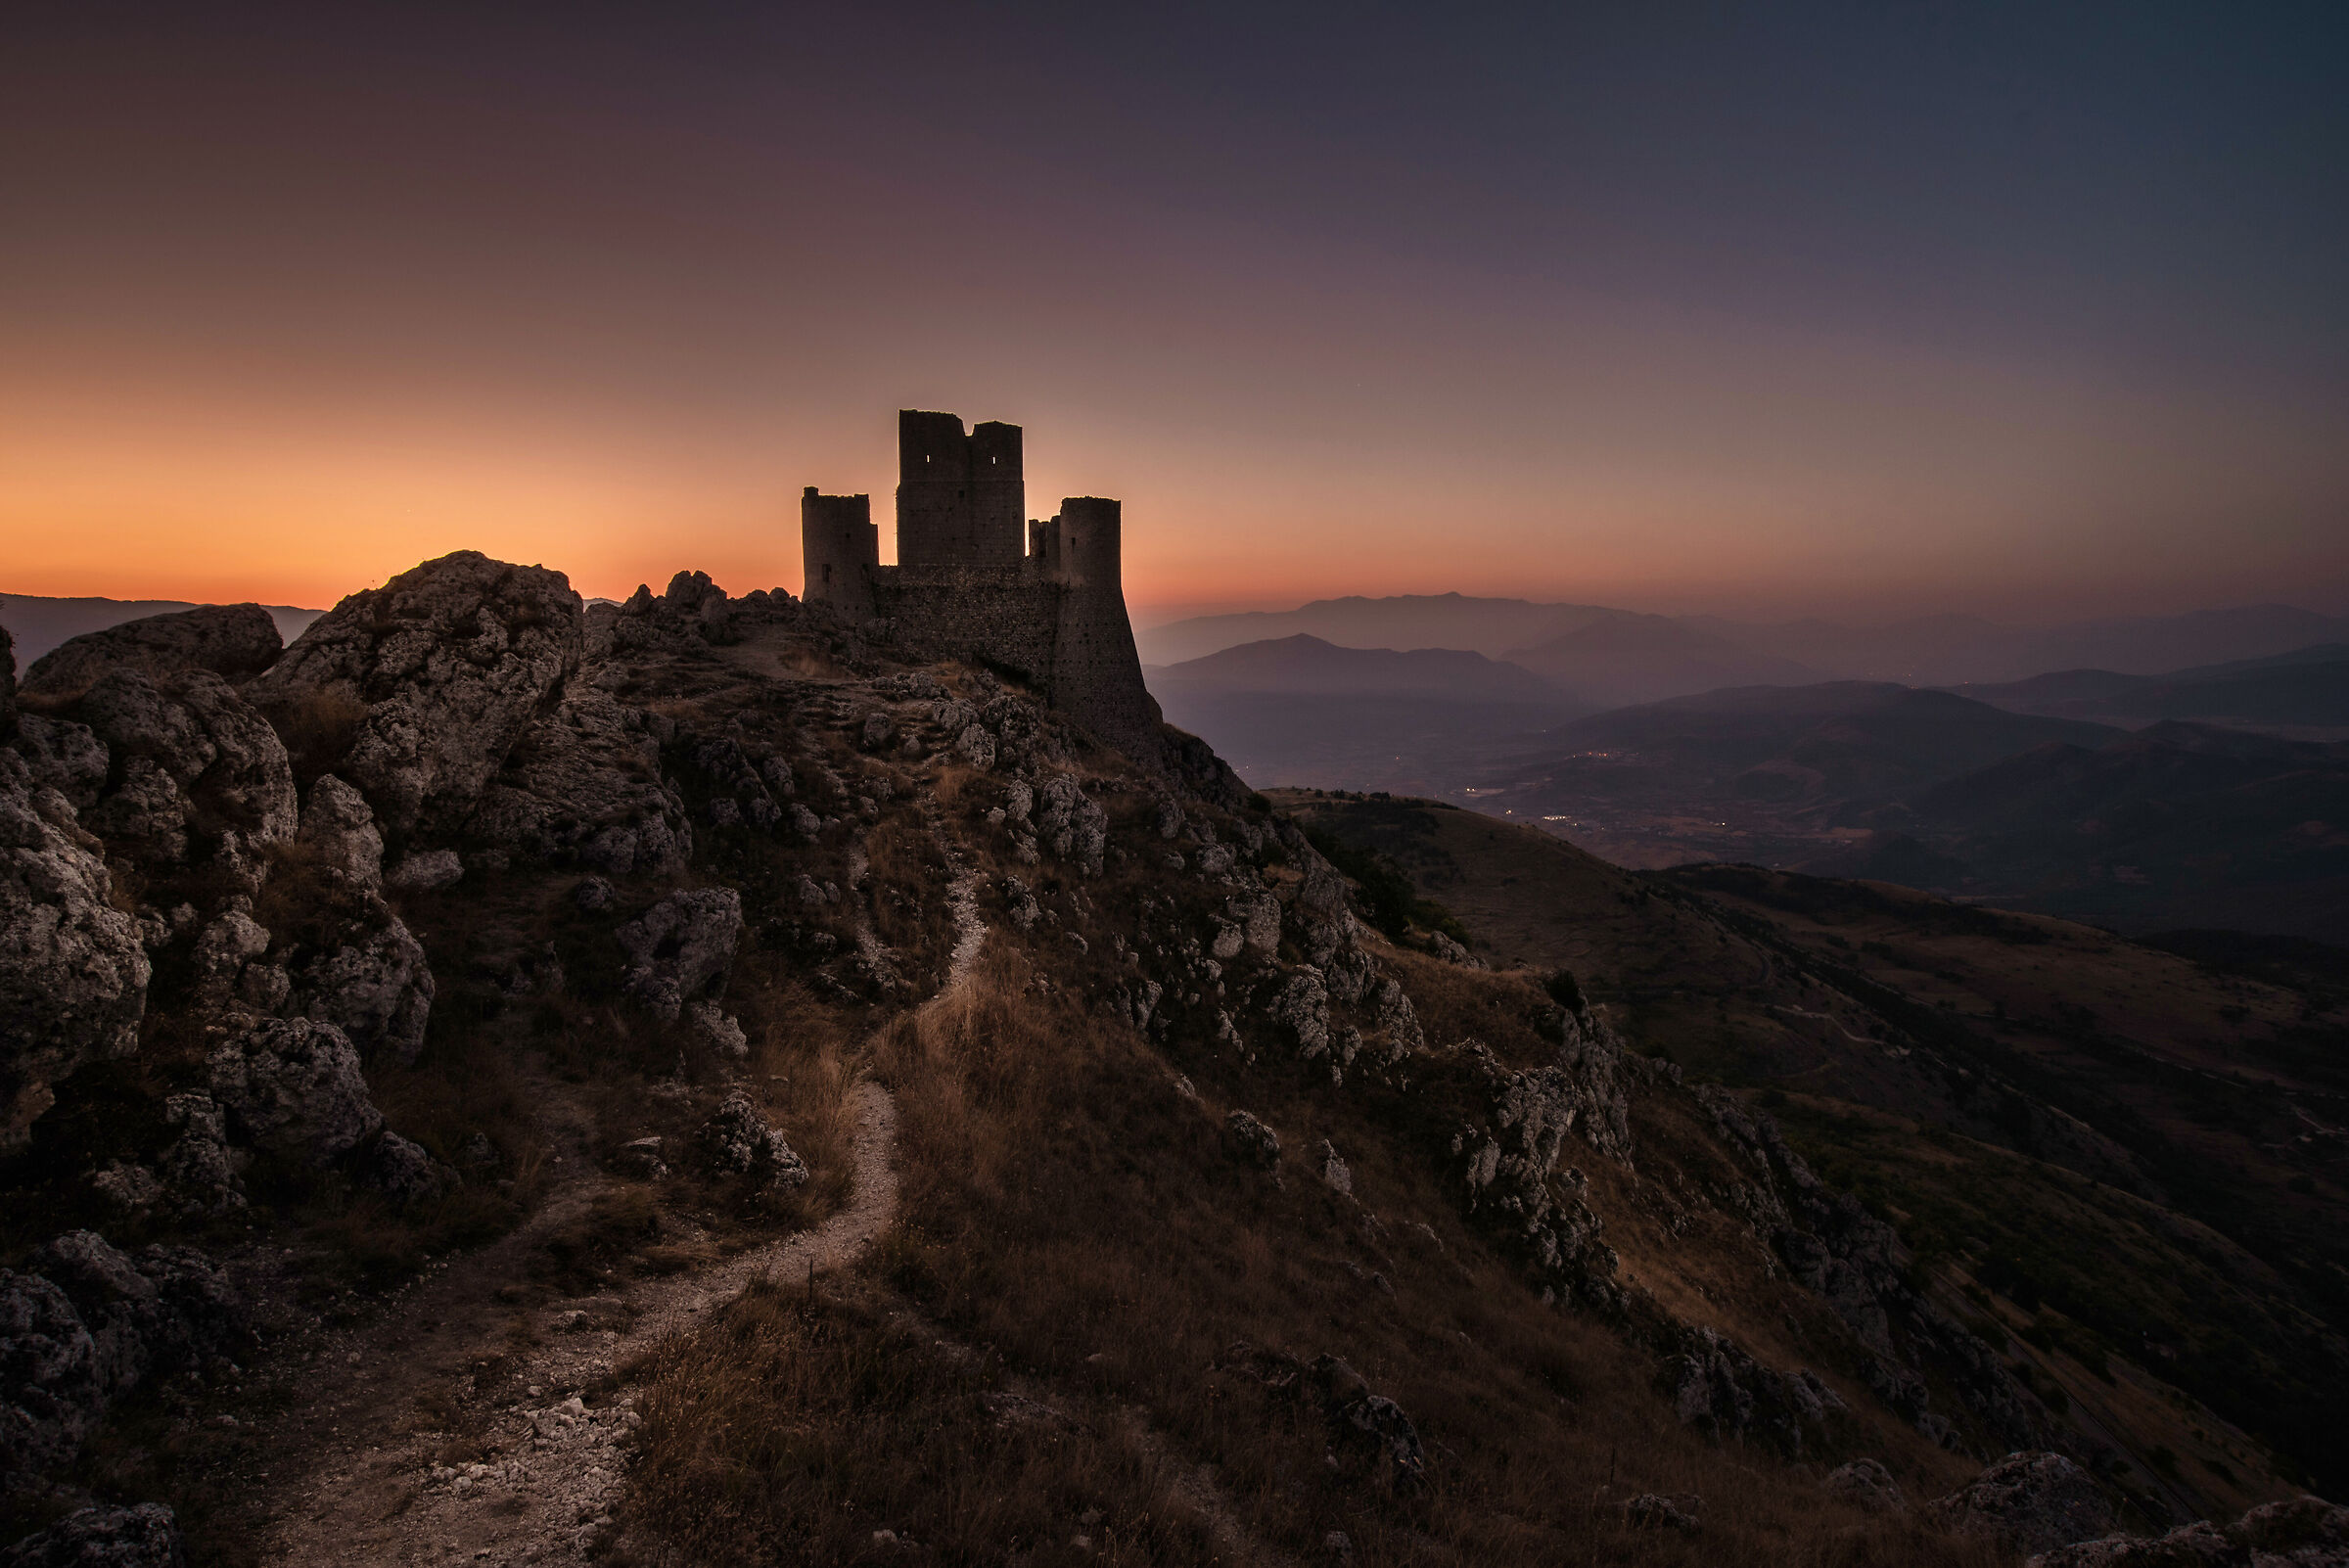 Waiting for the sunrise on the Rocca...